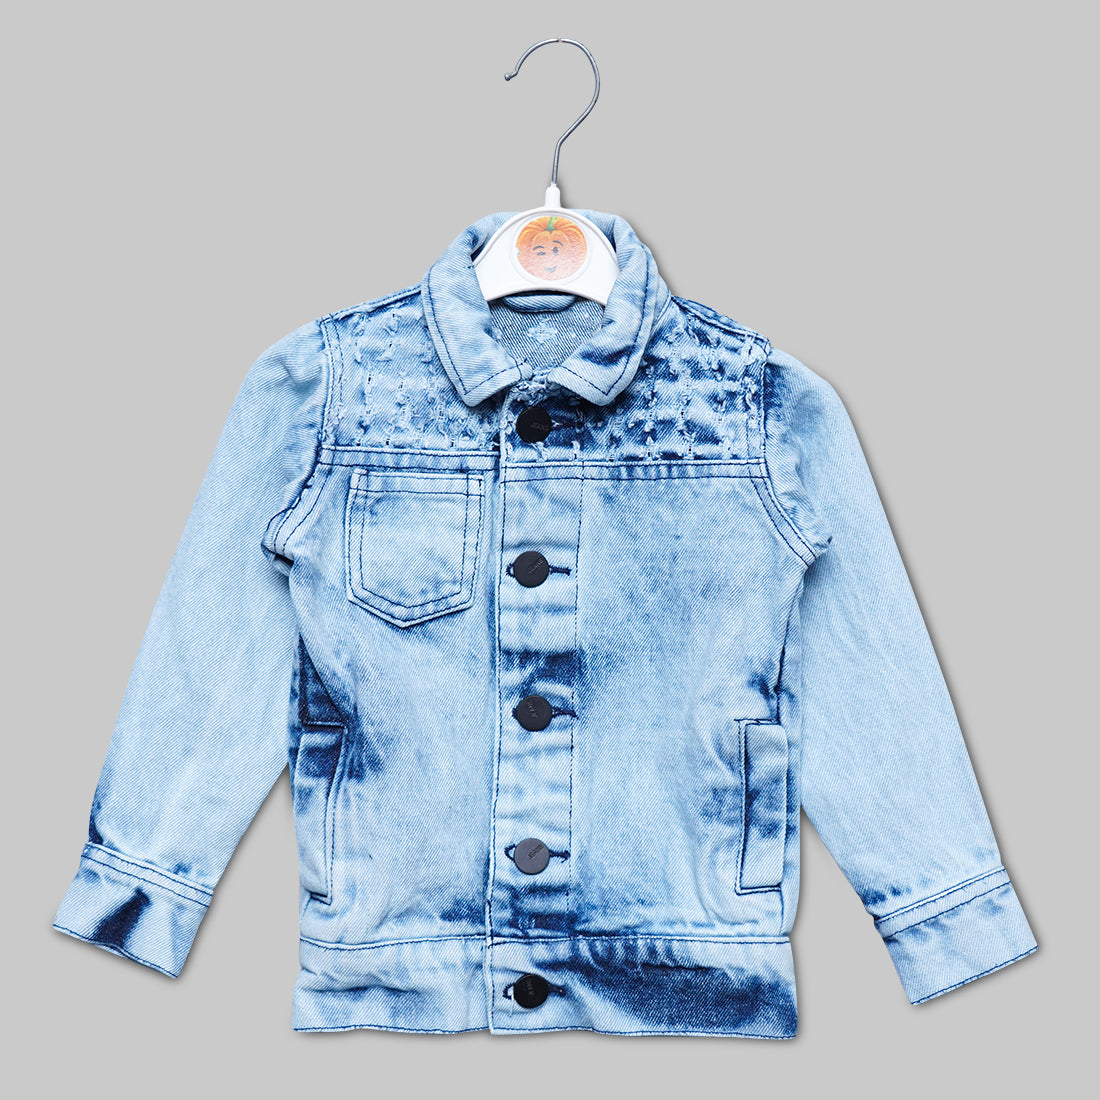 G-Star RAW Dakota Jacket - 89.97 €. Buy Denim Jackets from G-Star RAW  online at Boozt.com. Fast delivery and easy returns